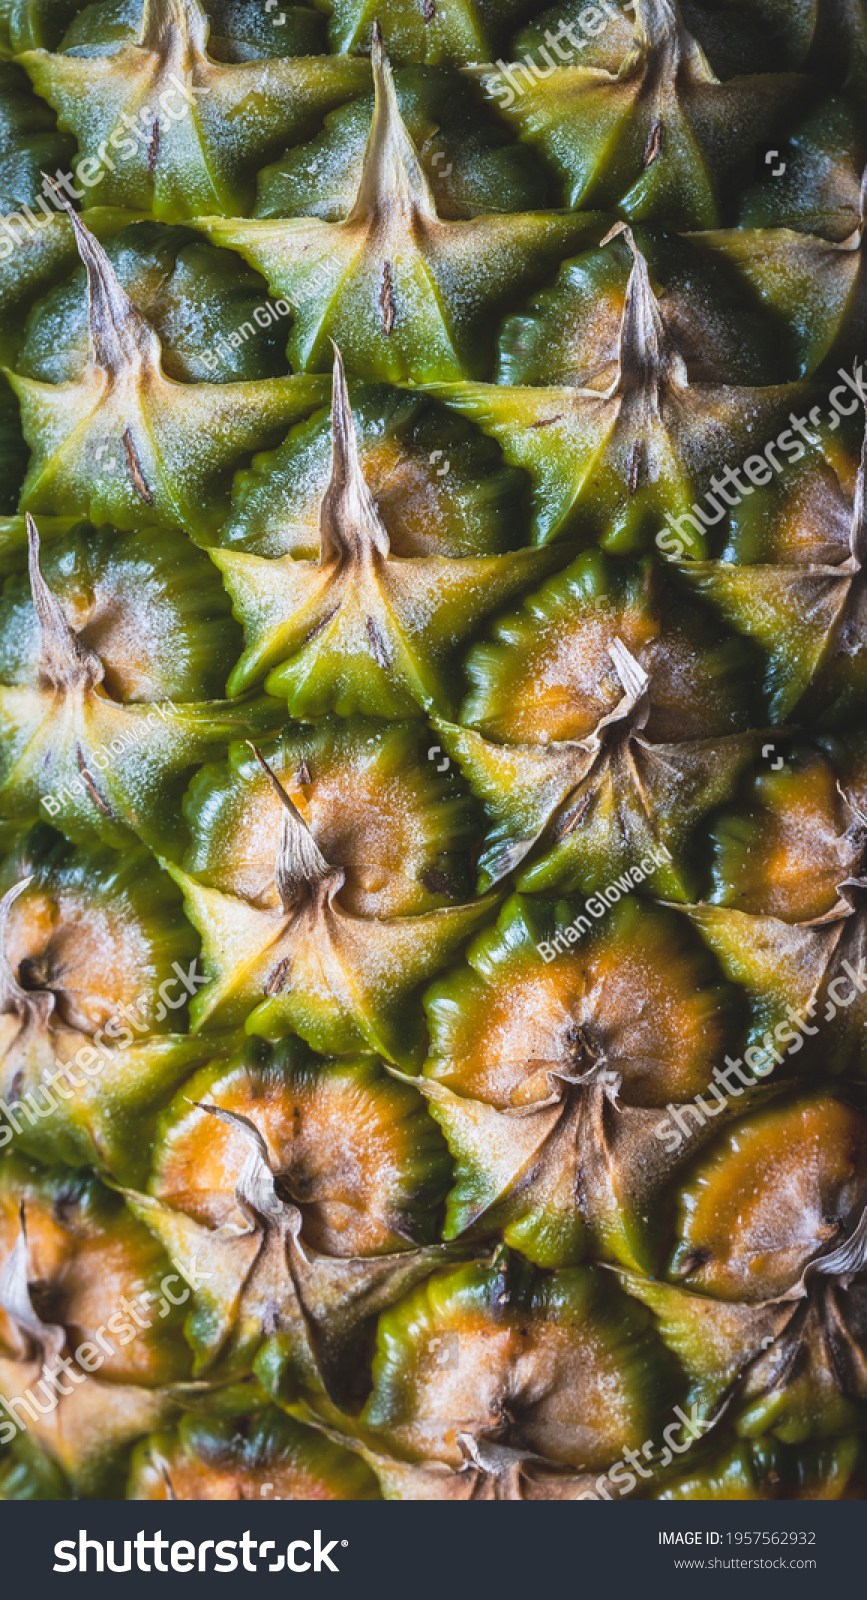 Close Image Pineapple Showing Texture Rough Stock Photo Shutterstock